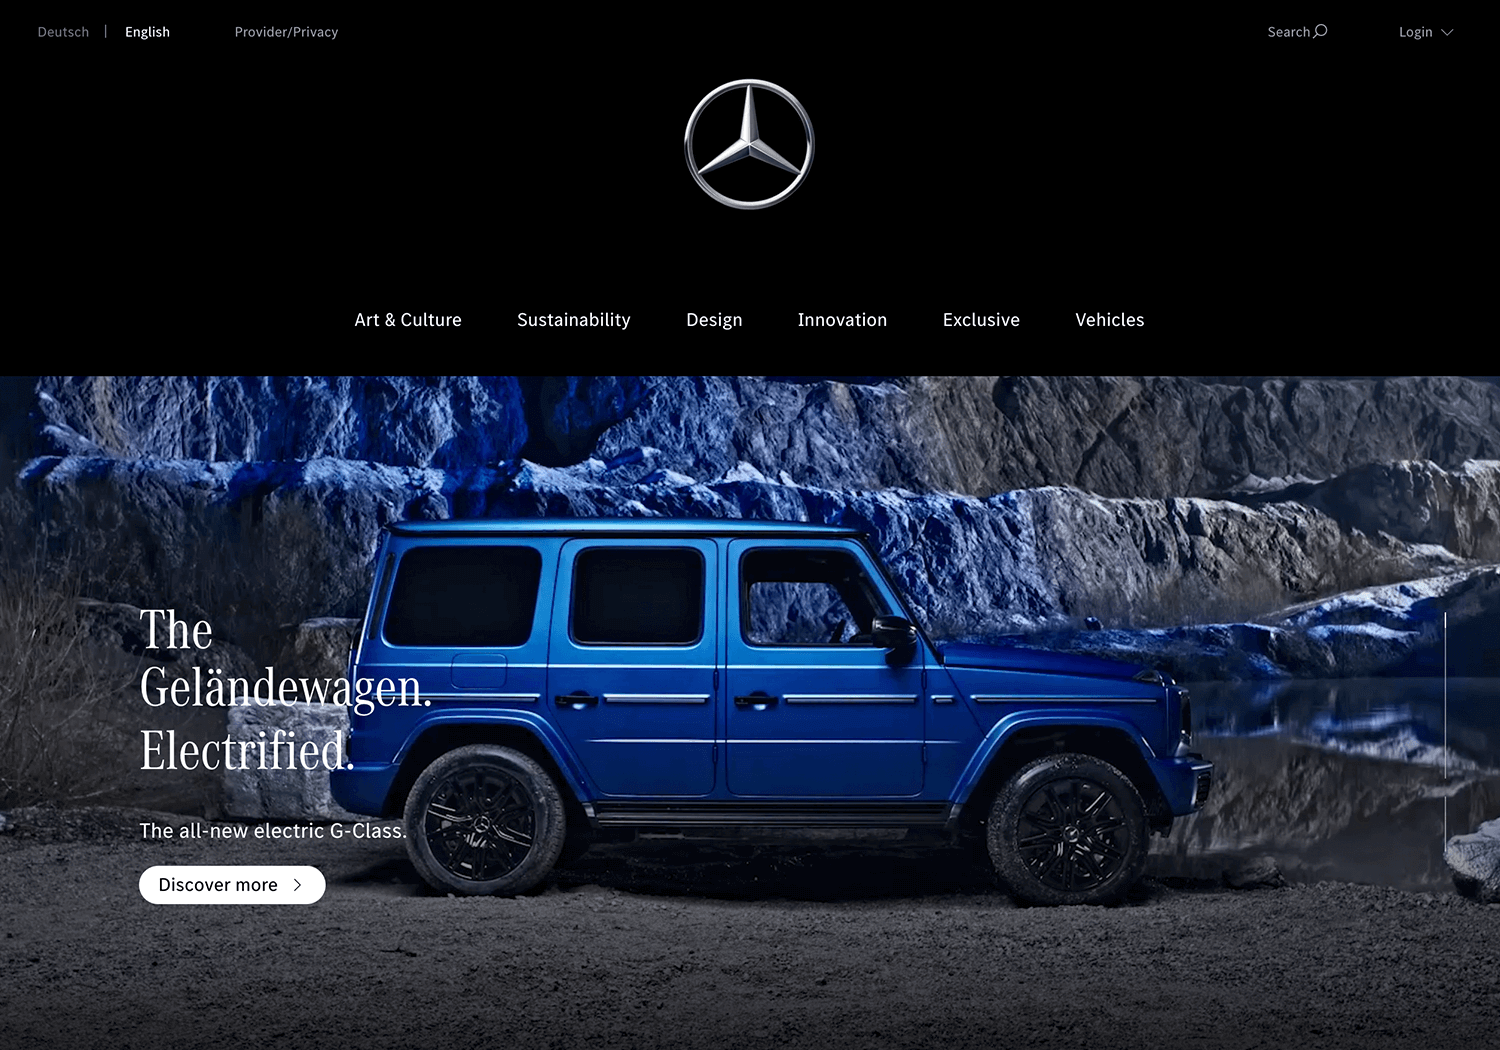 Mercedes-Benz homepage showing a blue electric G-Class SUV with top navigation links